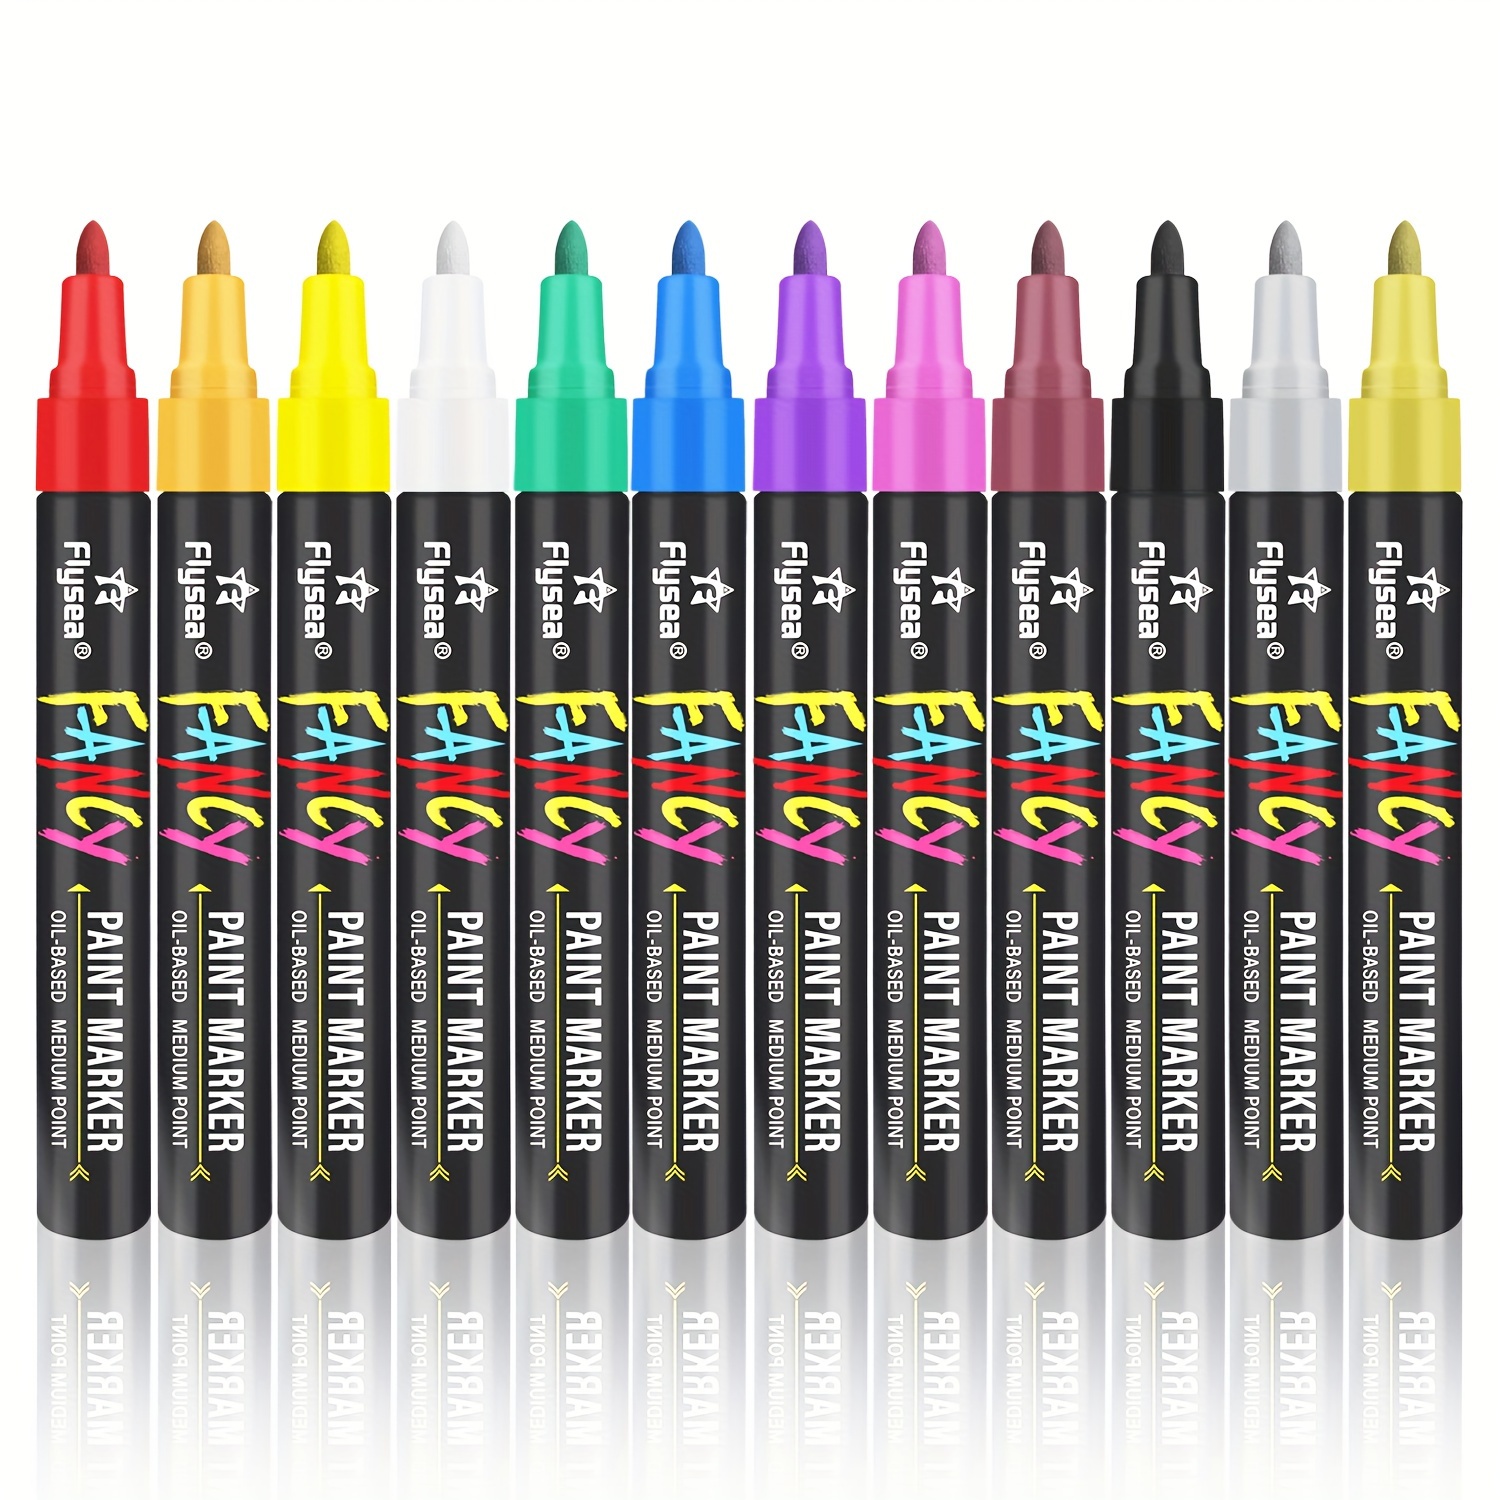 IVSUN Paint Pens Paint Markers, 20 Colors Oil-Based Waterproof Paint Marker  Pen Set, Never Fade Quick Dry and Permanent, Works on Rocks Painting